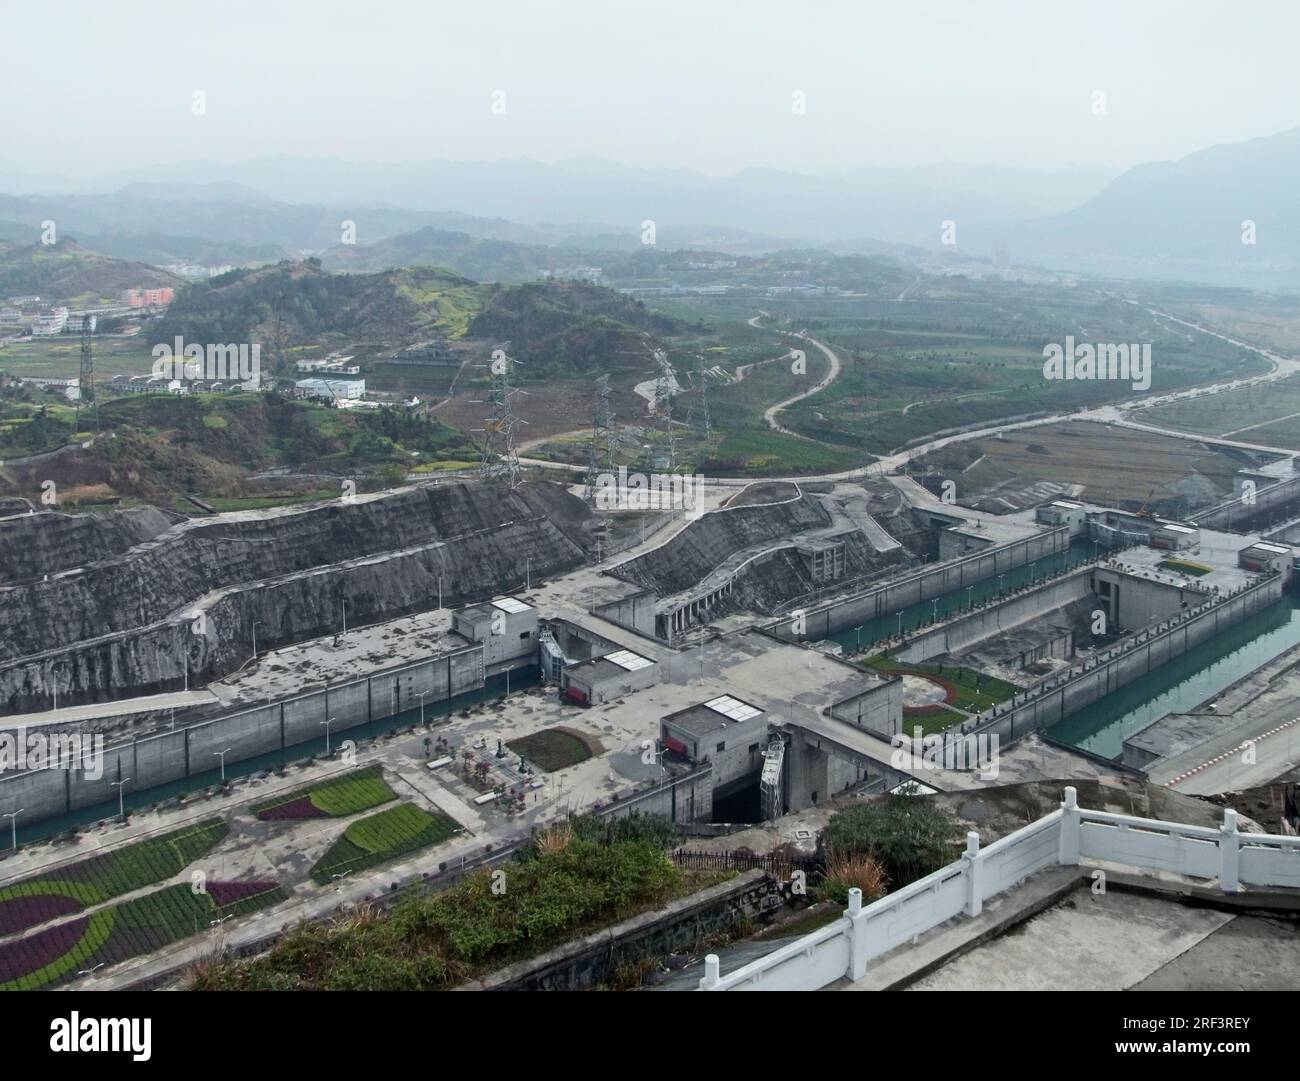 foggy aerial view of the Three Gorges Dam at Yangtze River in China Stock Photo